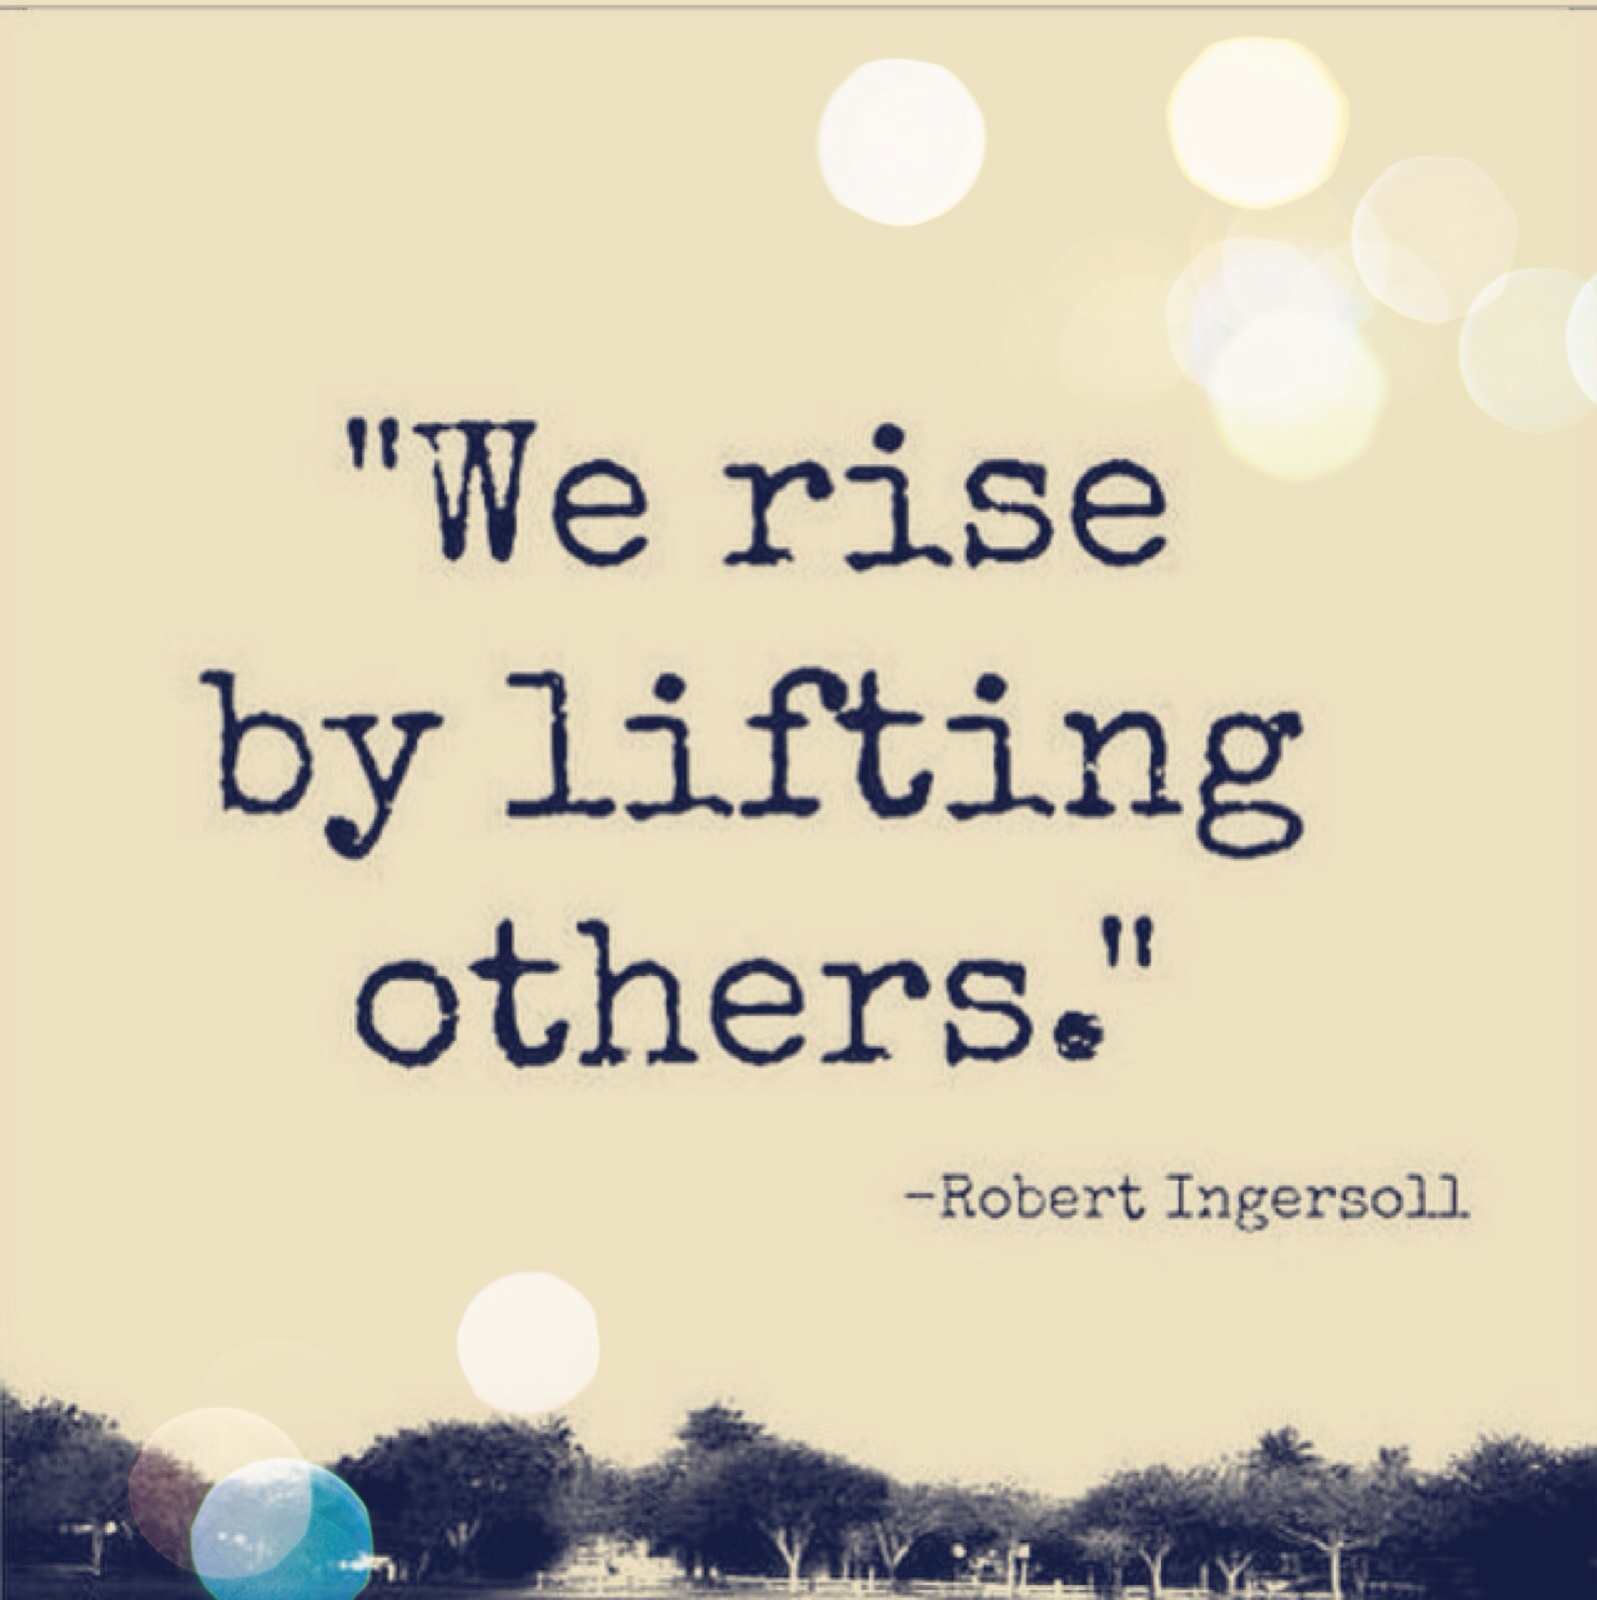 we rise by llifting others. robert ingersoll